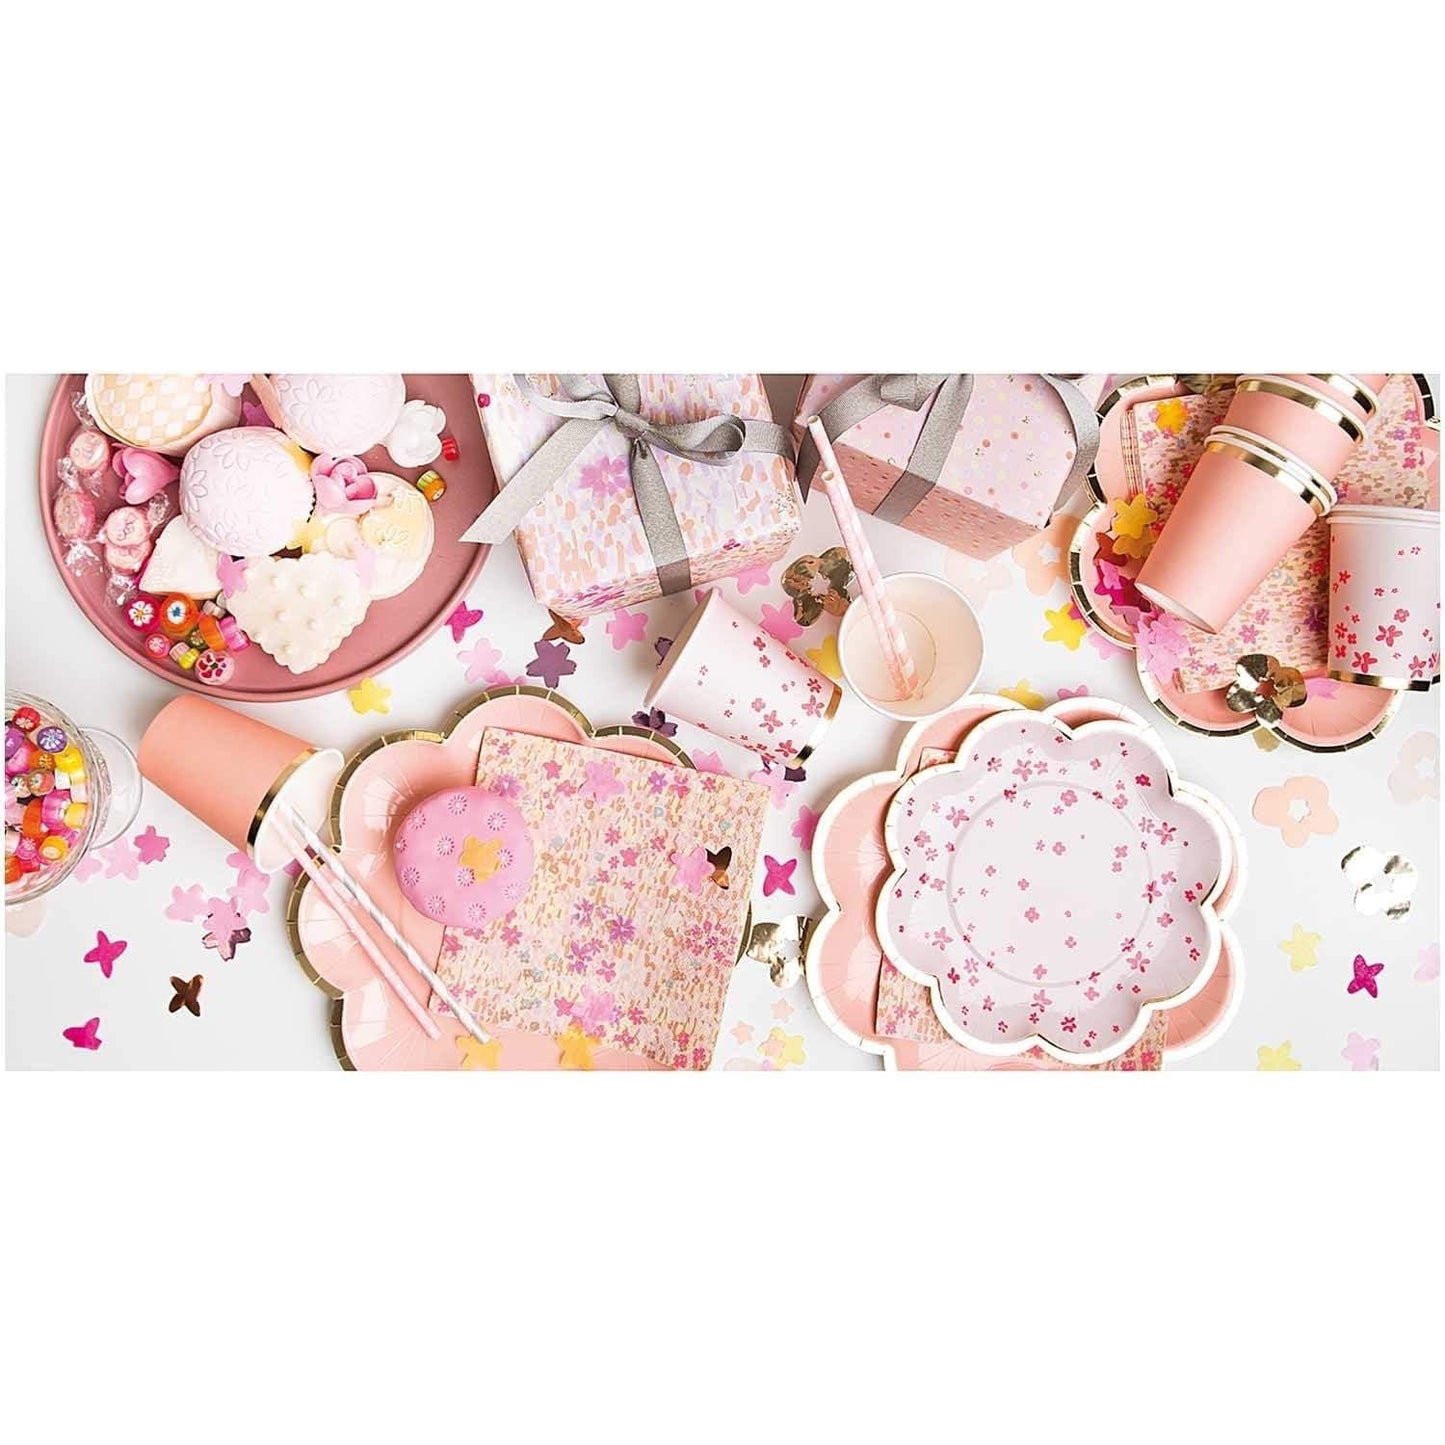 Flower shaped Confetti | Pink Party Confetti  | Pretty Little Party YEY! Lets Party